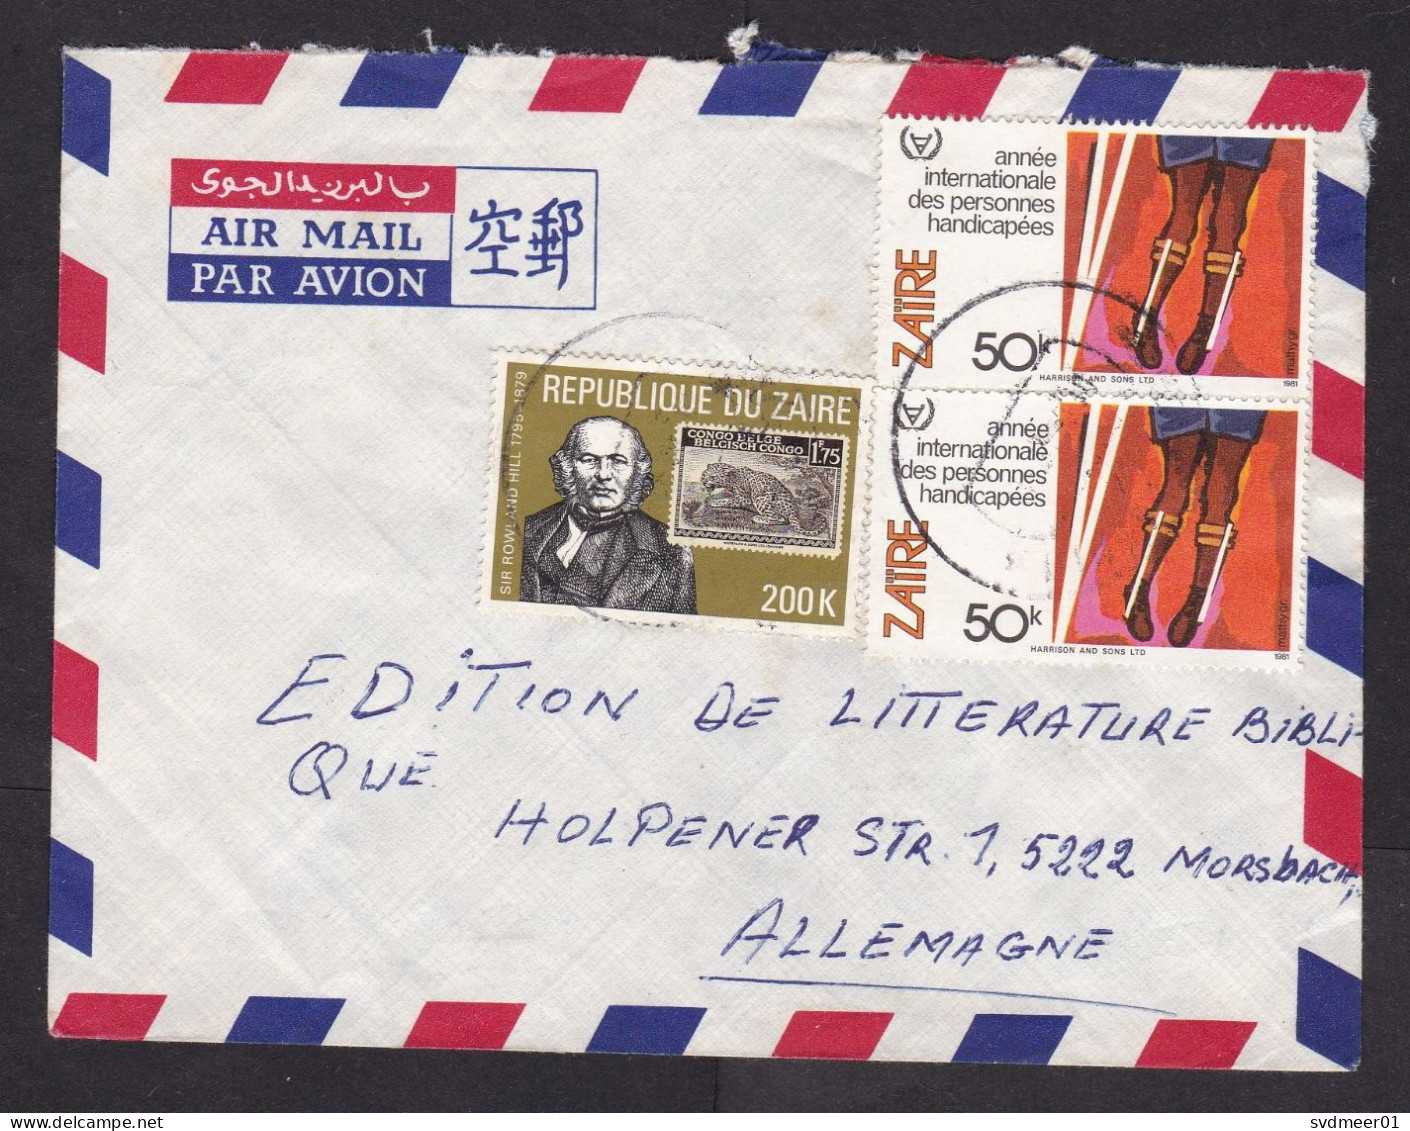 Zaire: Airmail Cover To Germany, 1980s, 3 Stamps, Disabled, Rowland Hill, Postal History, Rare Real Use (minor Damage) - Covers & Documents